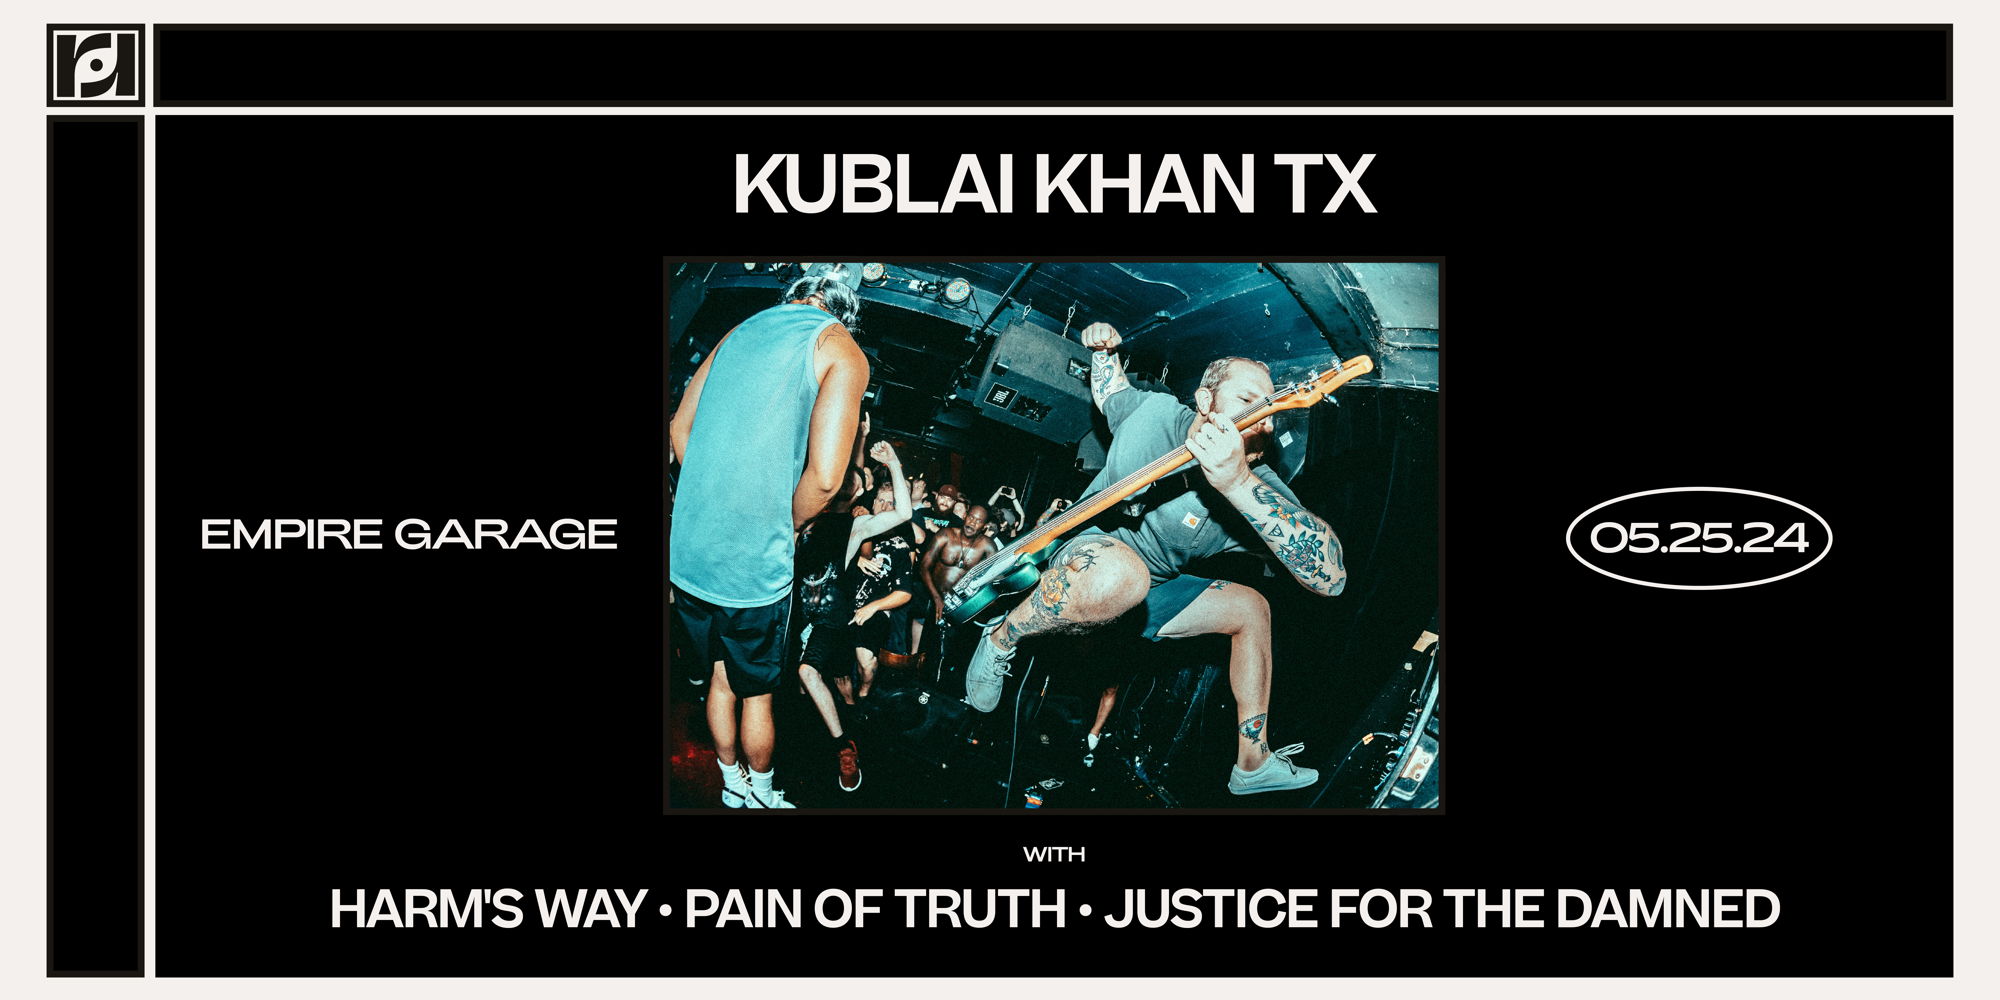 Resound Presents: Kublai Khan TX w/ Harm's Way, Pain of Truth, and Justice For The Damned at Empire Garage promotional image